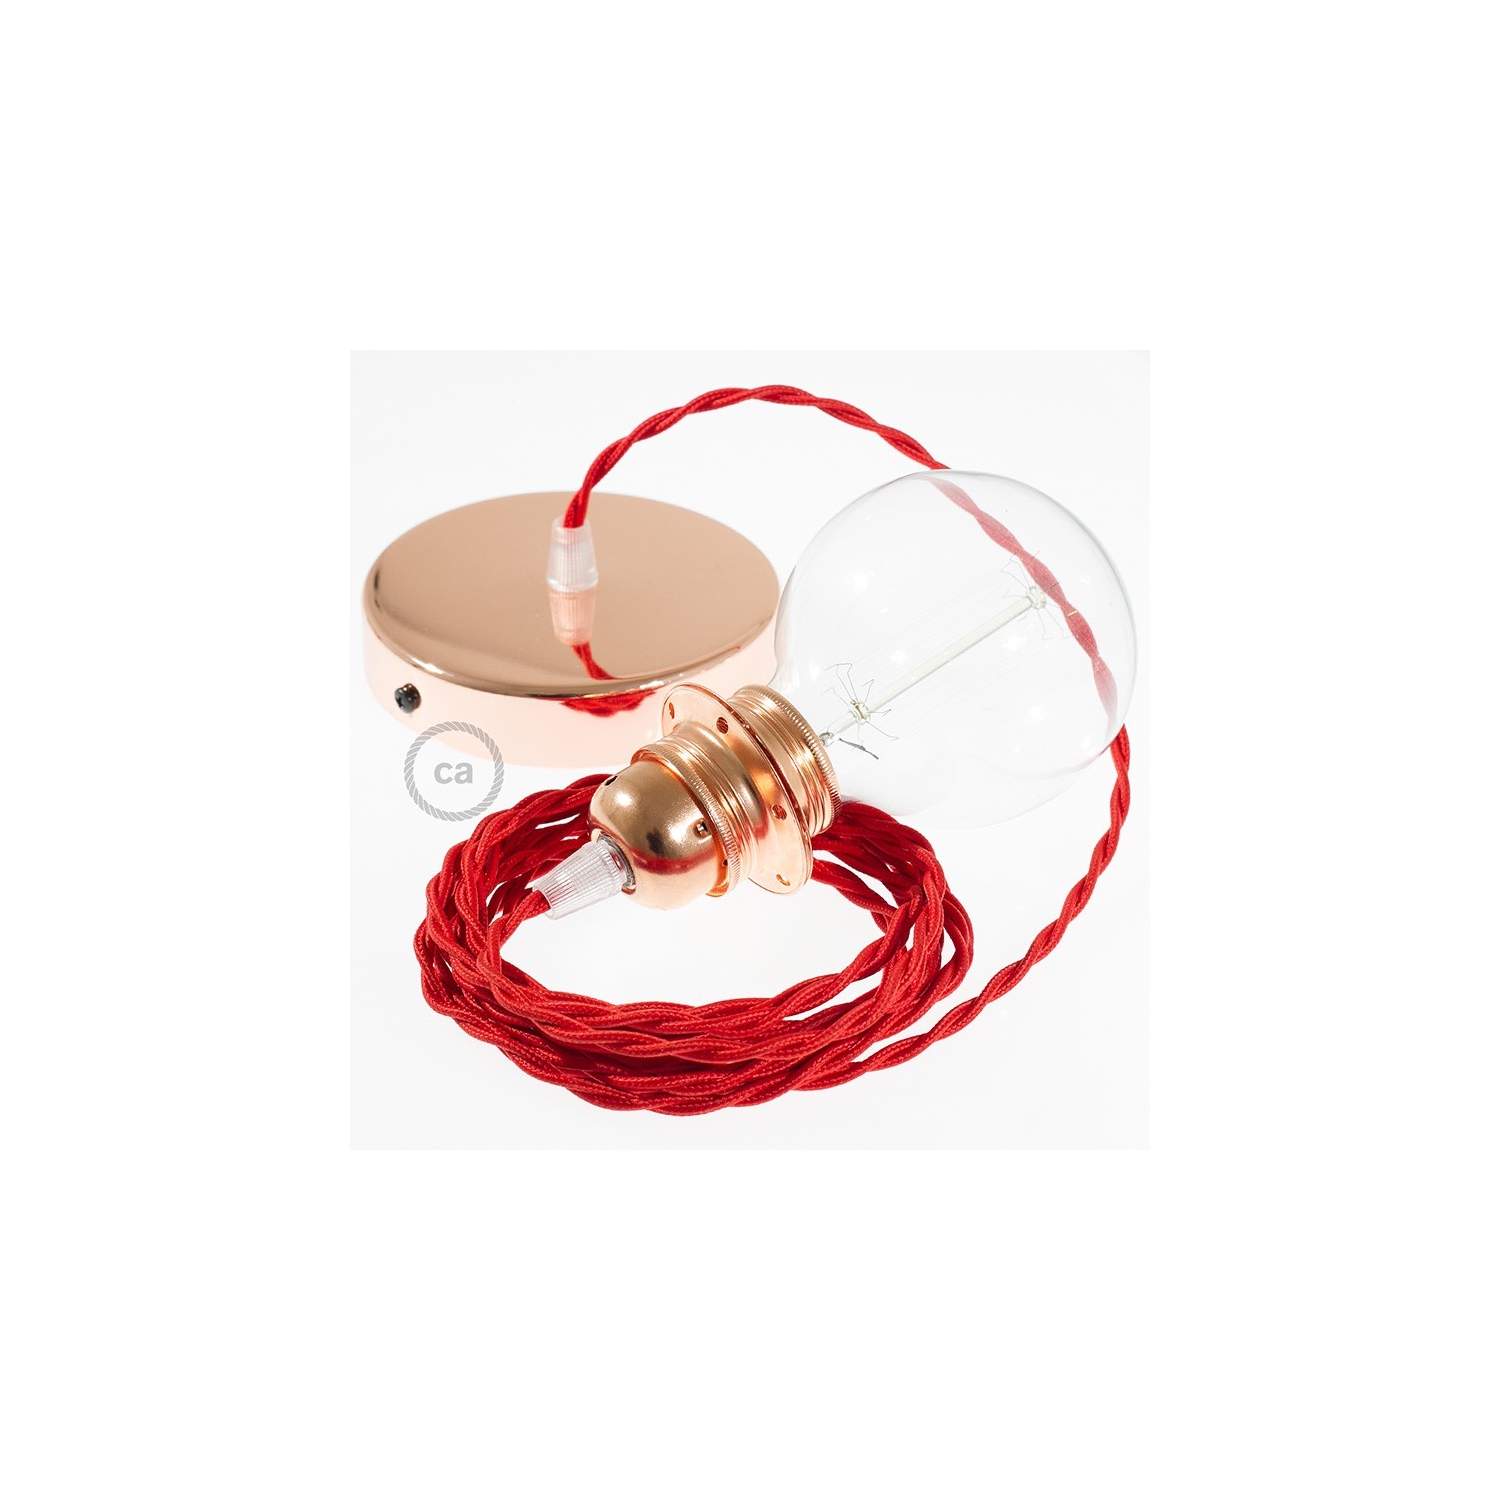 Pendant for lampshade, suspended lamp with Red Rayon textile cable TM09